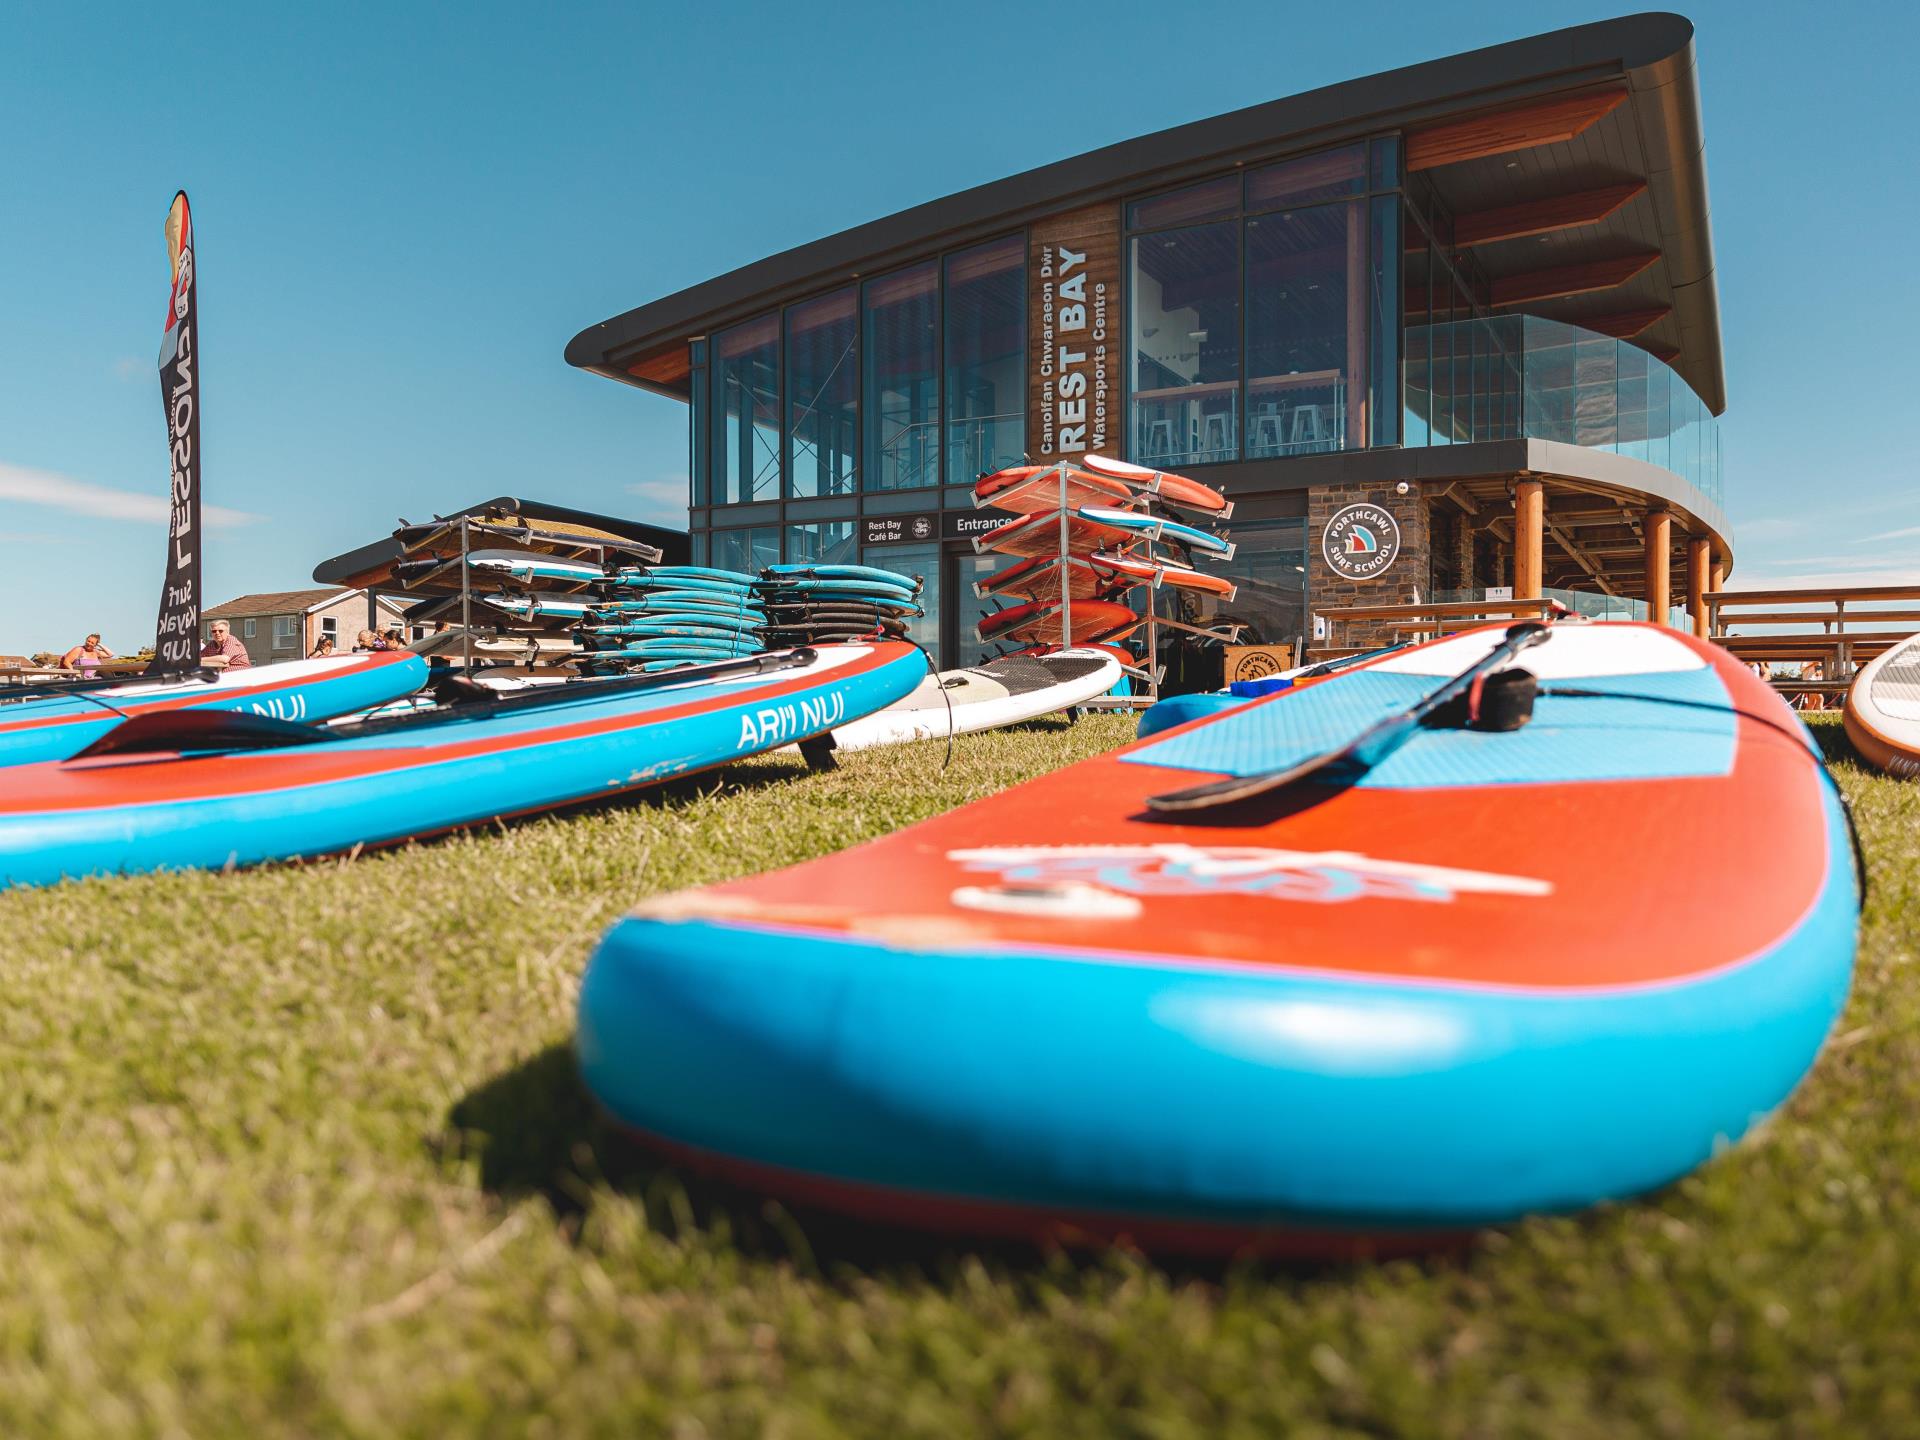 Rest Bay Watersports Centre